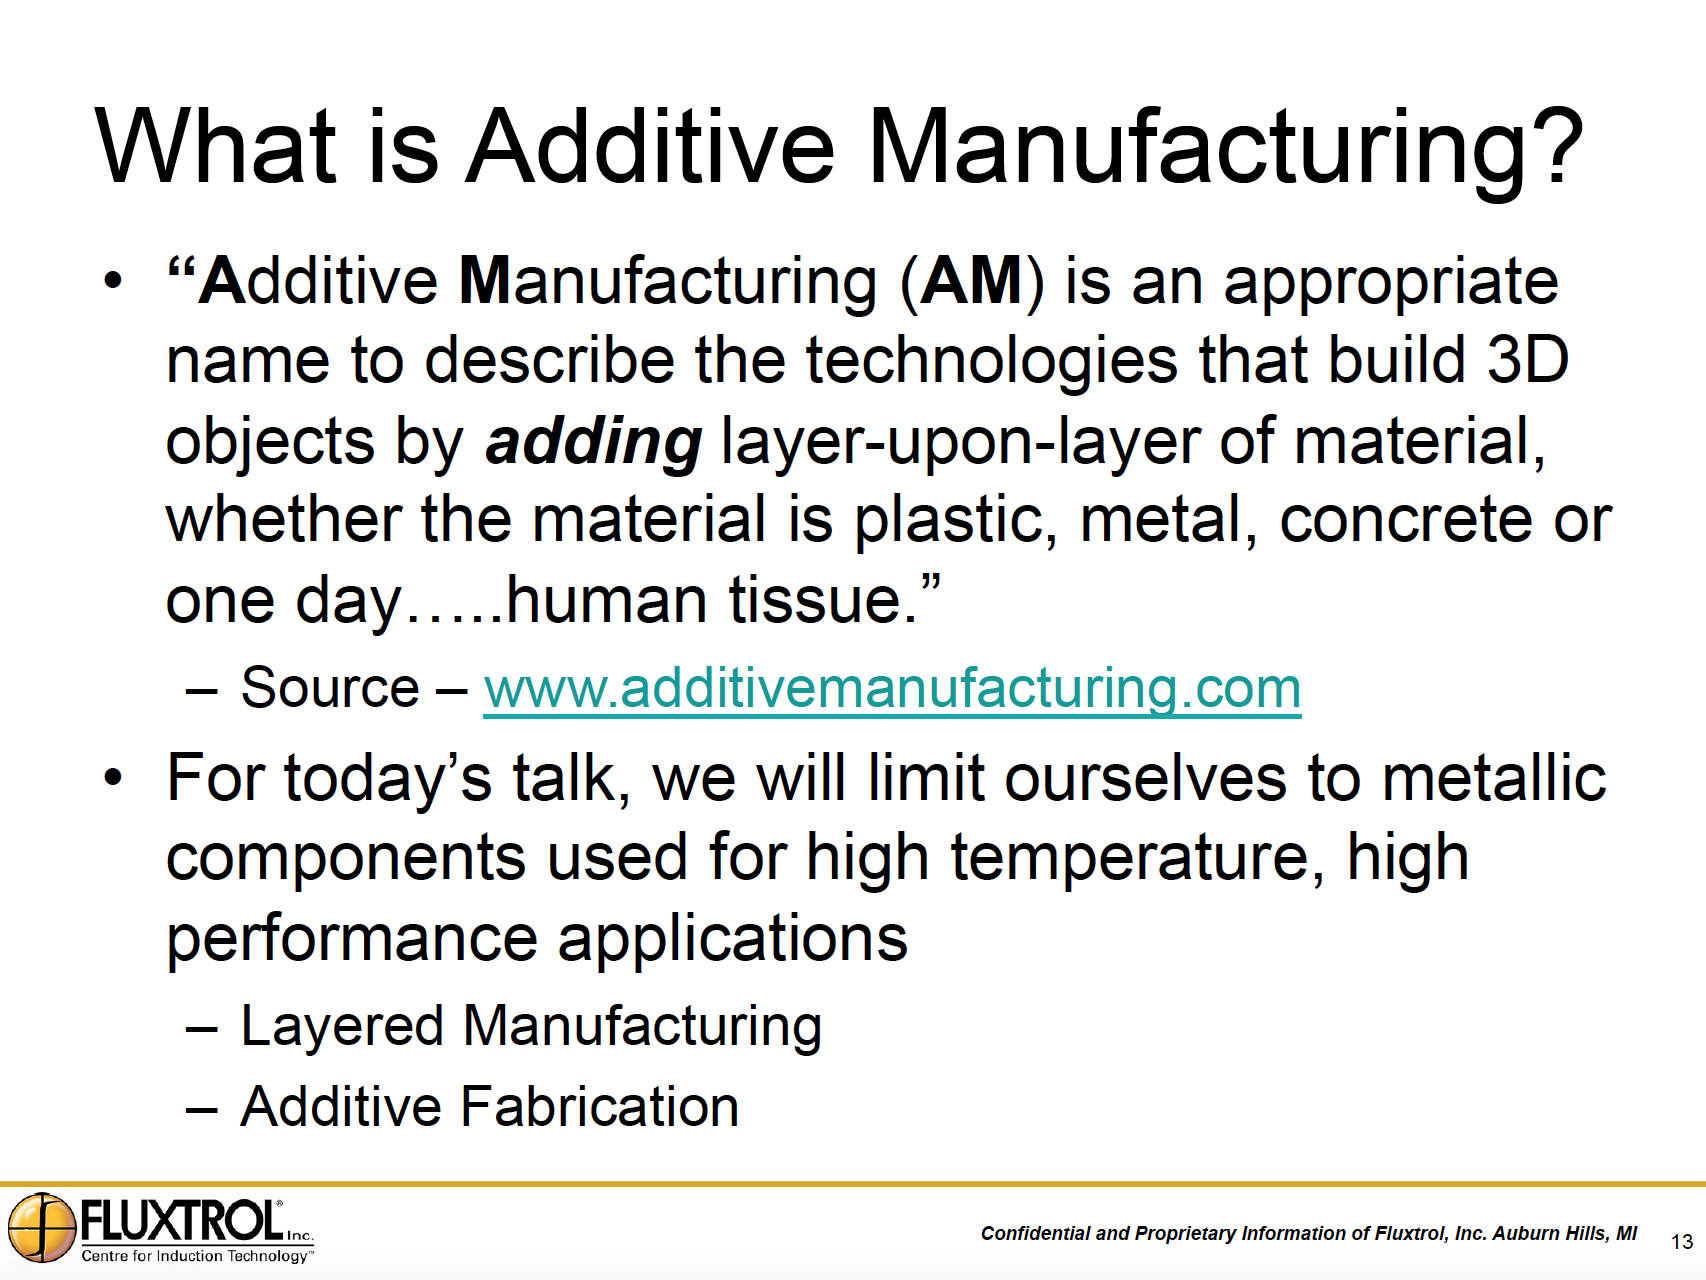 Fluxtrol | Applications of Induction Heating Enabling Advancement in Materials Science Figure 12 - What is Additive Manufacturing?